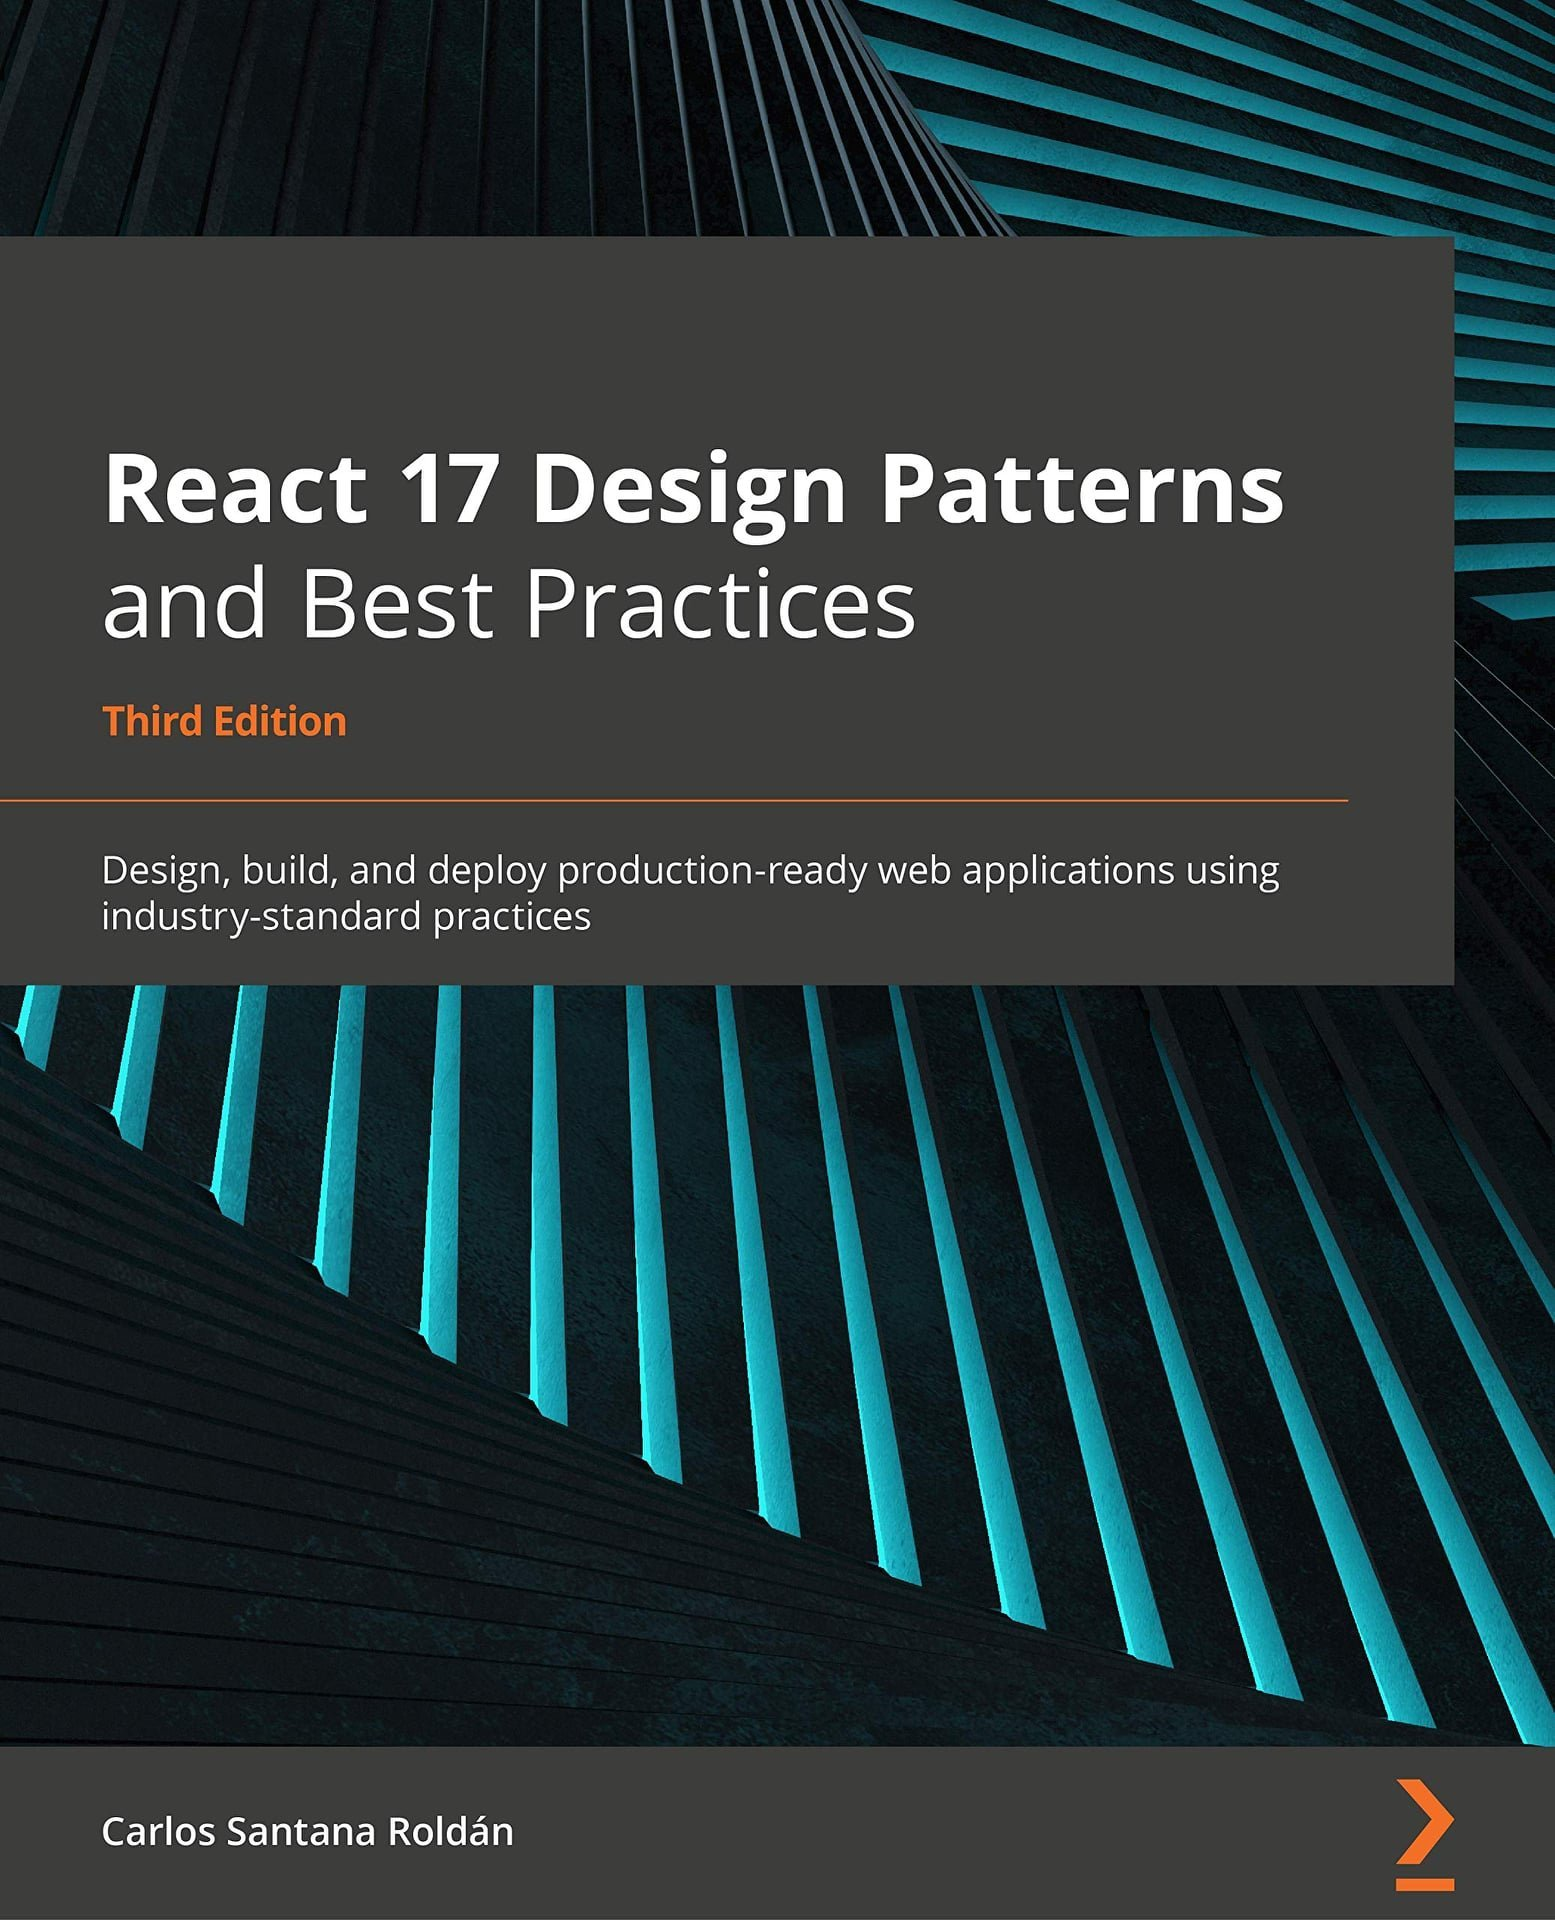 React 17 Design Patterns and Best Practices – Third Edition